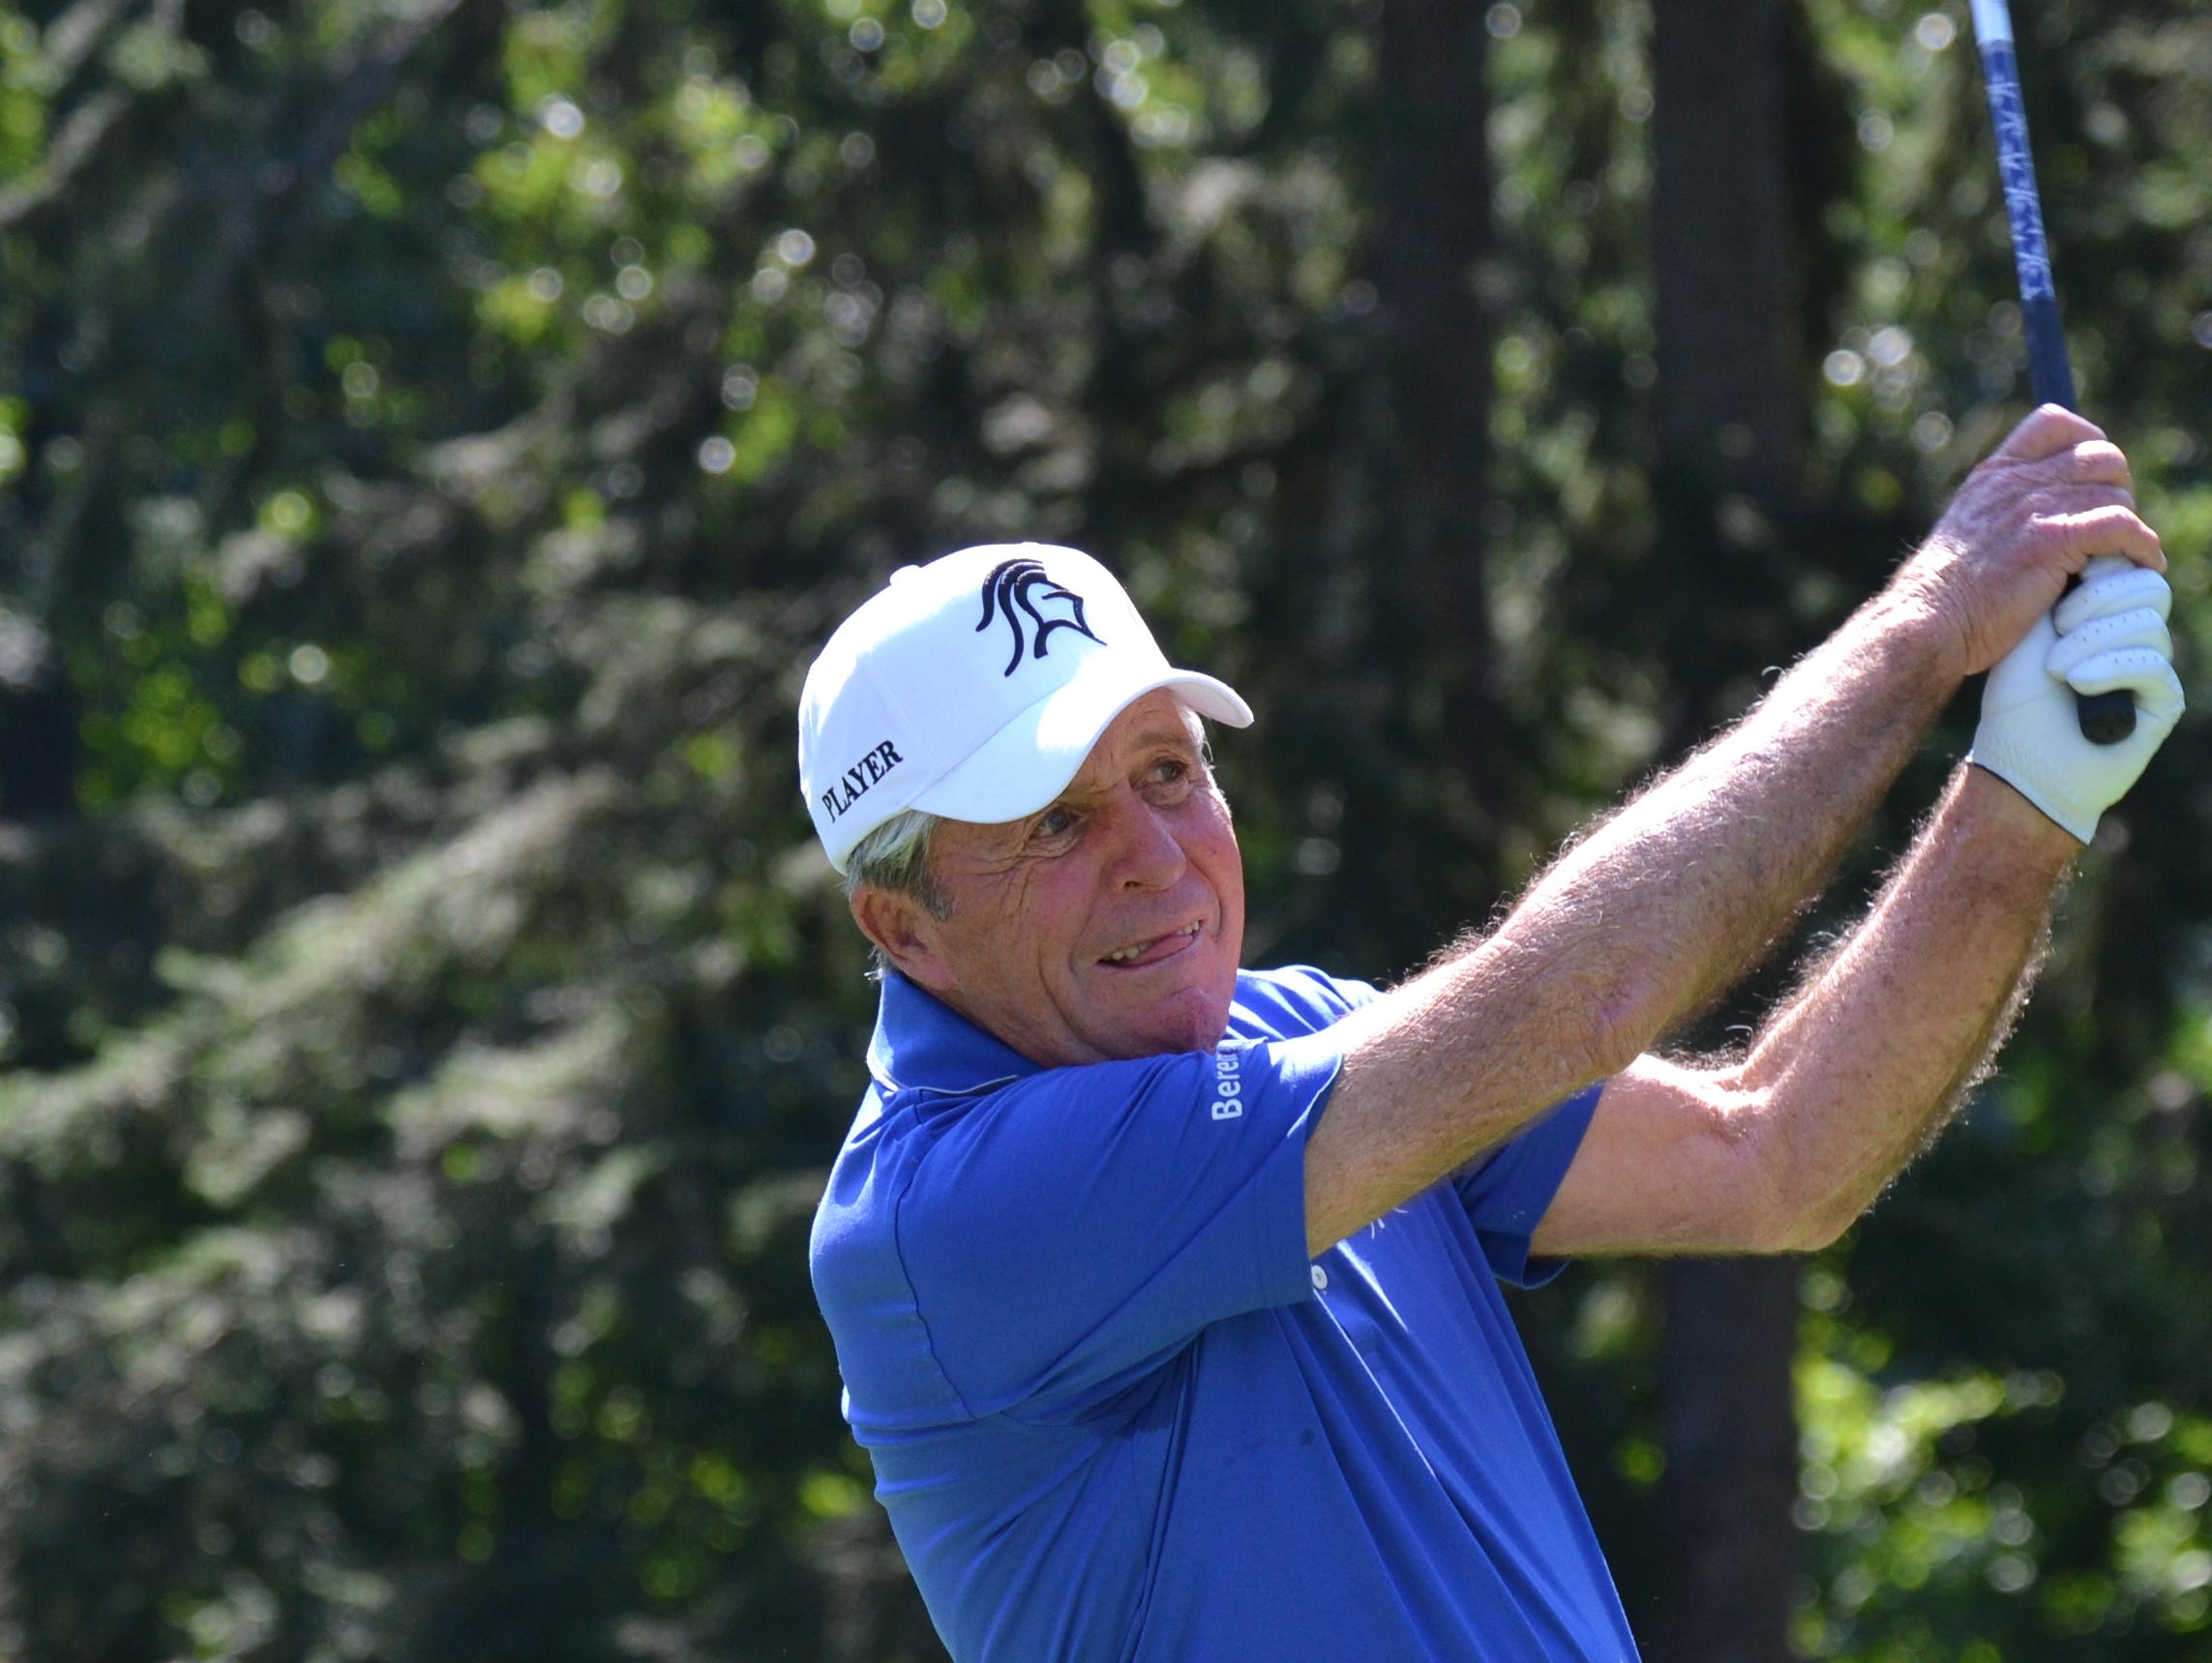 World Golf Hall of Famer Gary Player believes incentivizing junior golfers by subsidizing their greens fees will get more players on the local courses. The 81-year-old was at GlenArbor Golf Club in Bedford earlier this month for a charitable outing that raised $100,000 for his foundation.